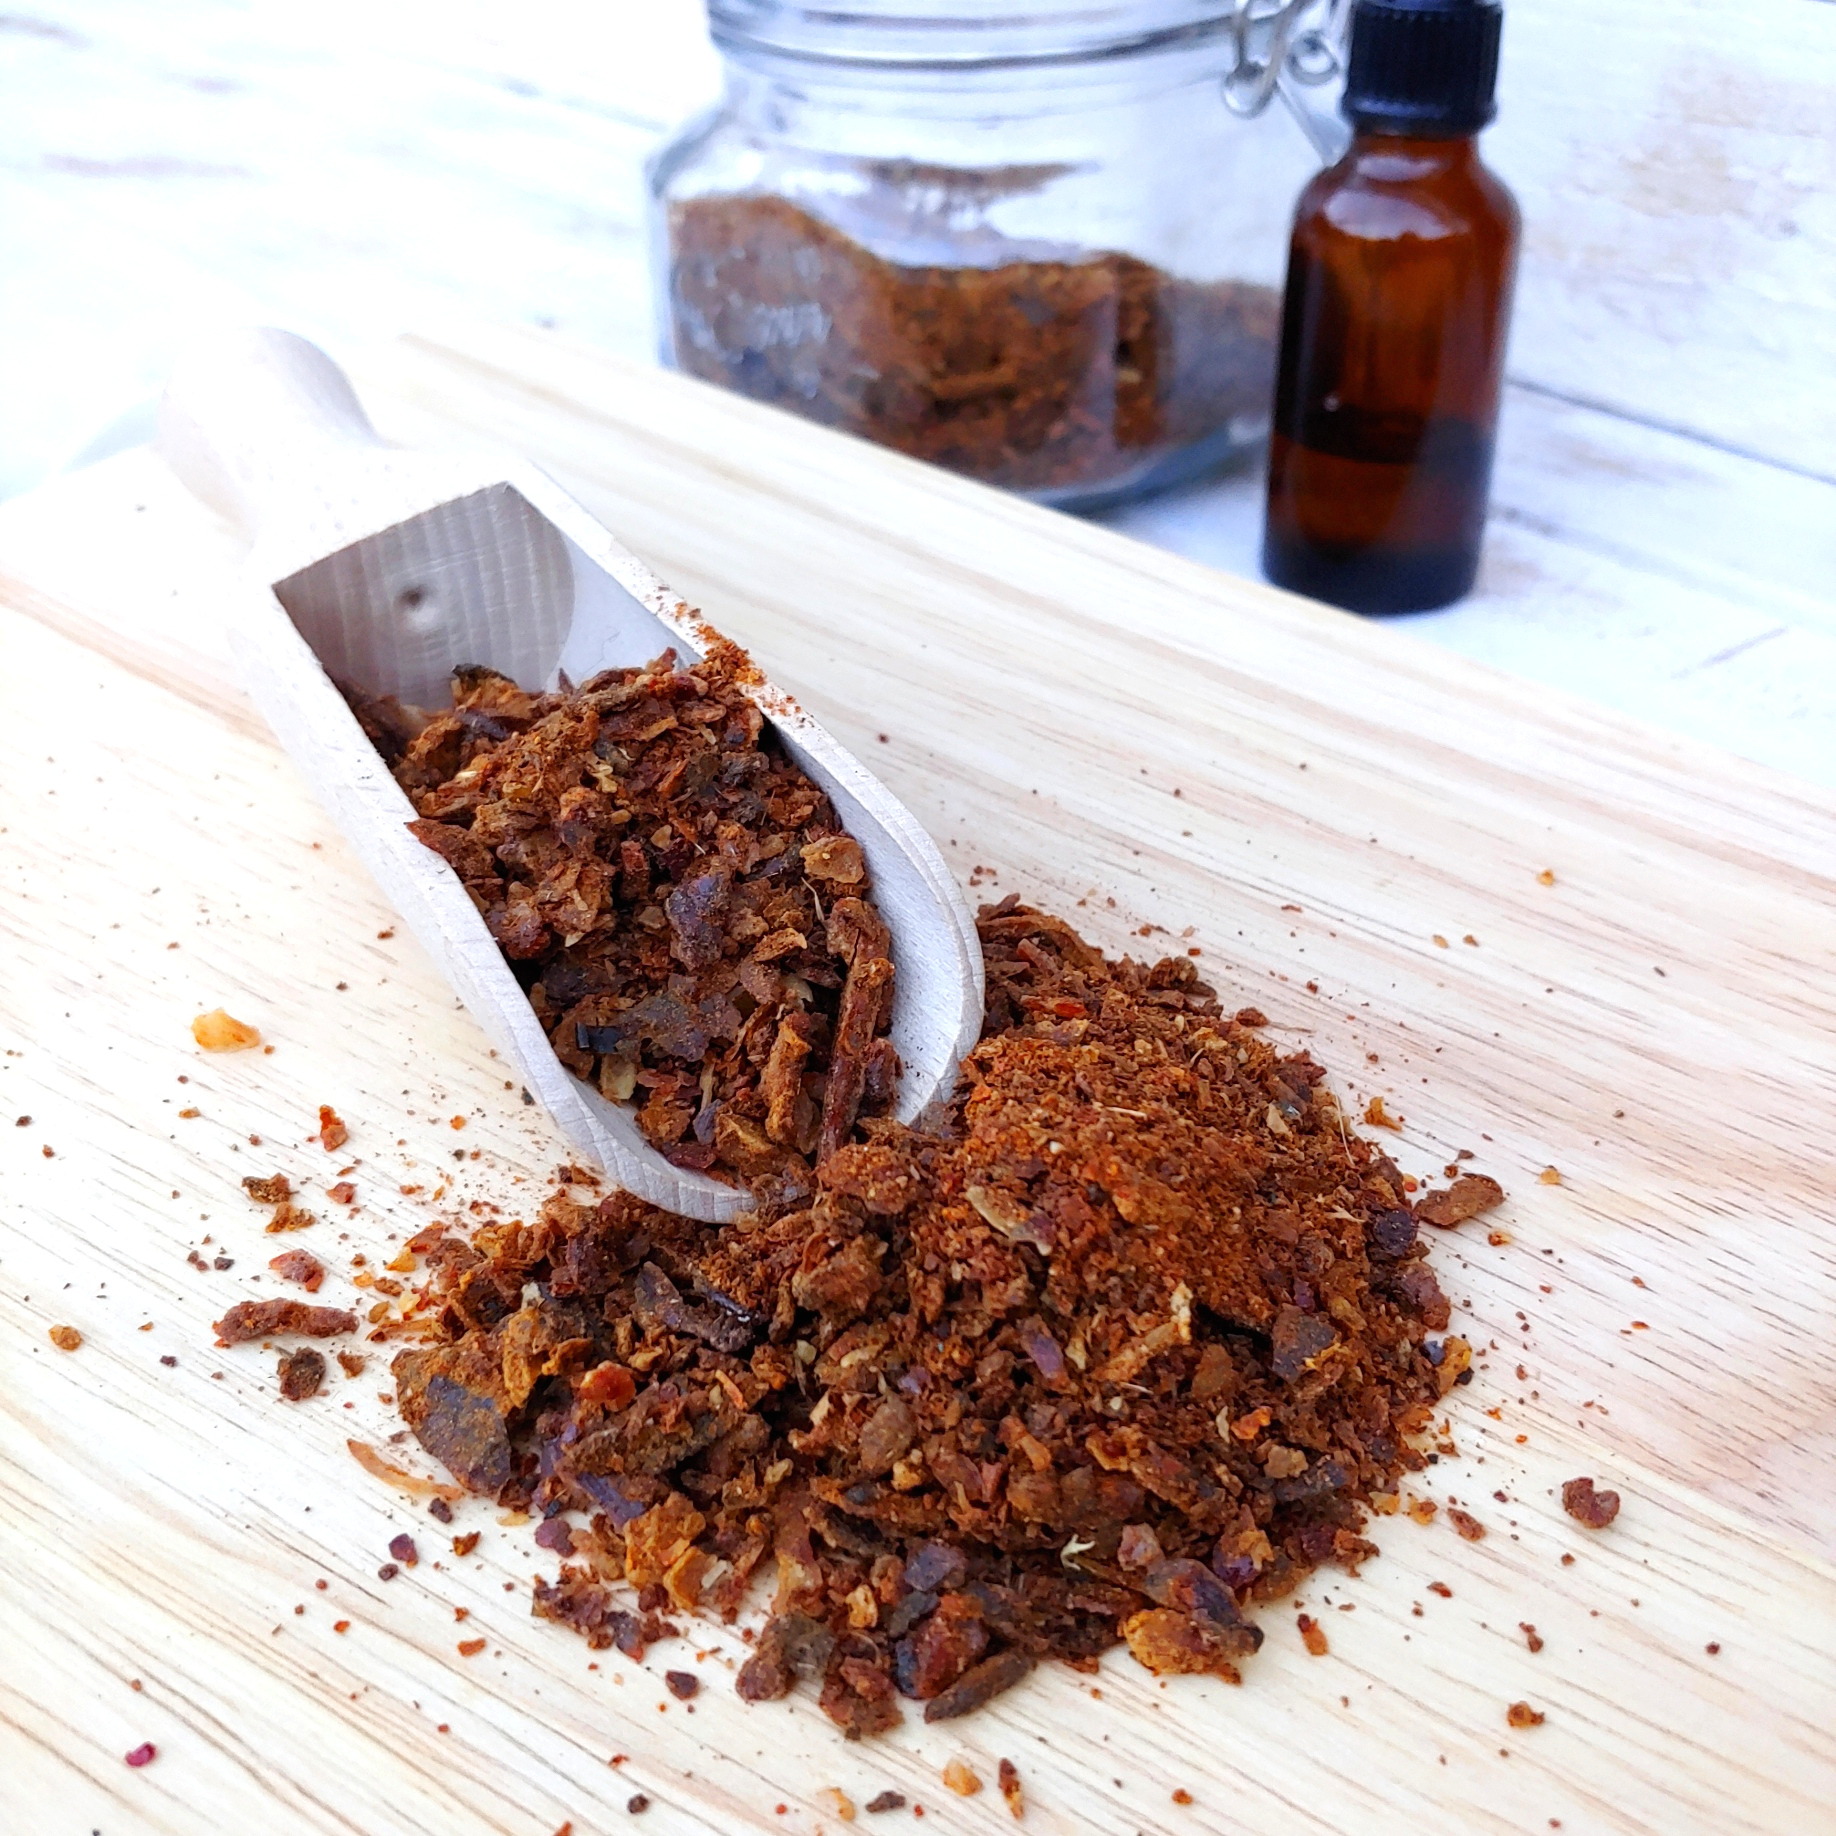 RECIPE FOR ALCOHOL BASED TINCTURE OF PROPOLIS